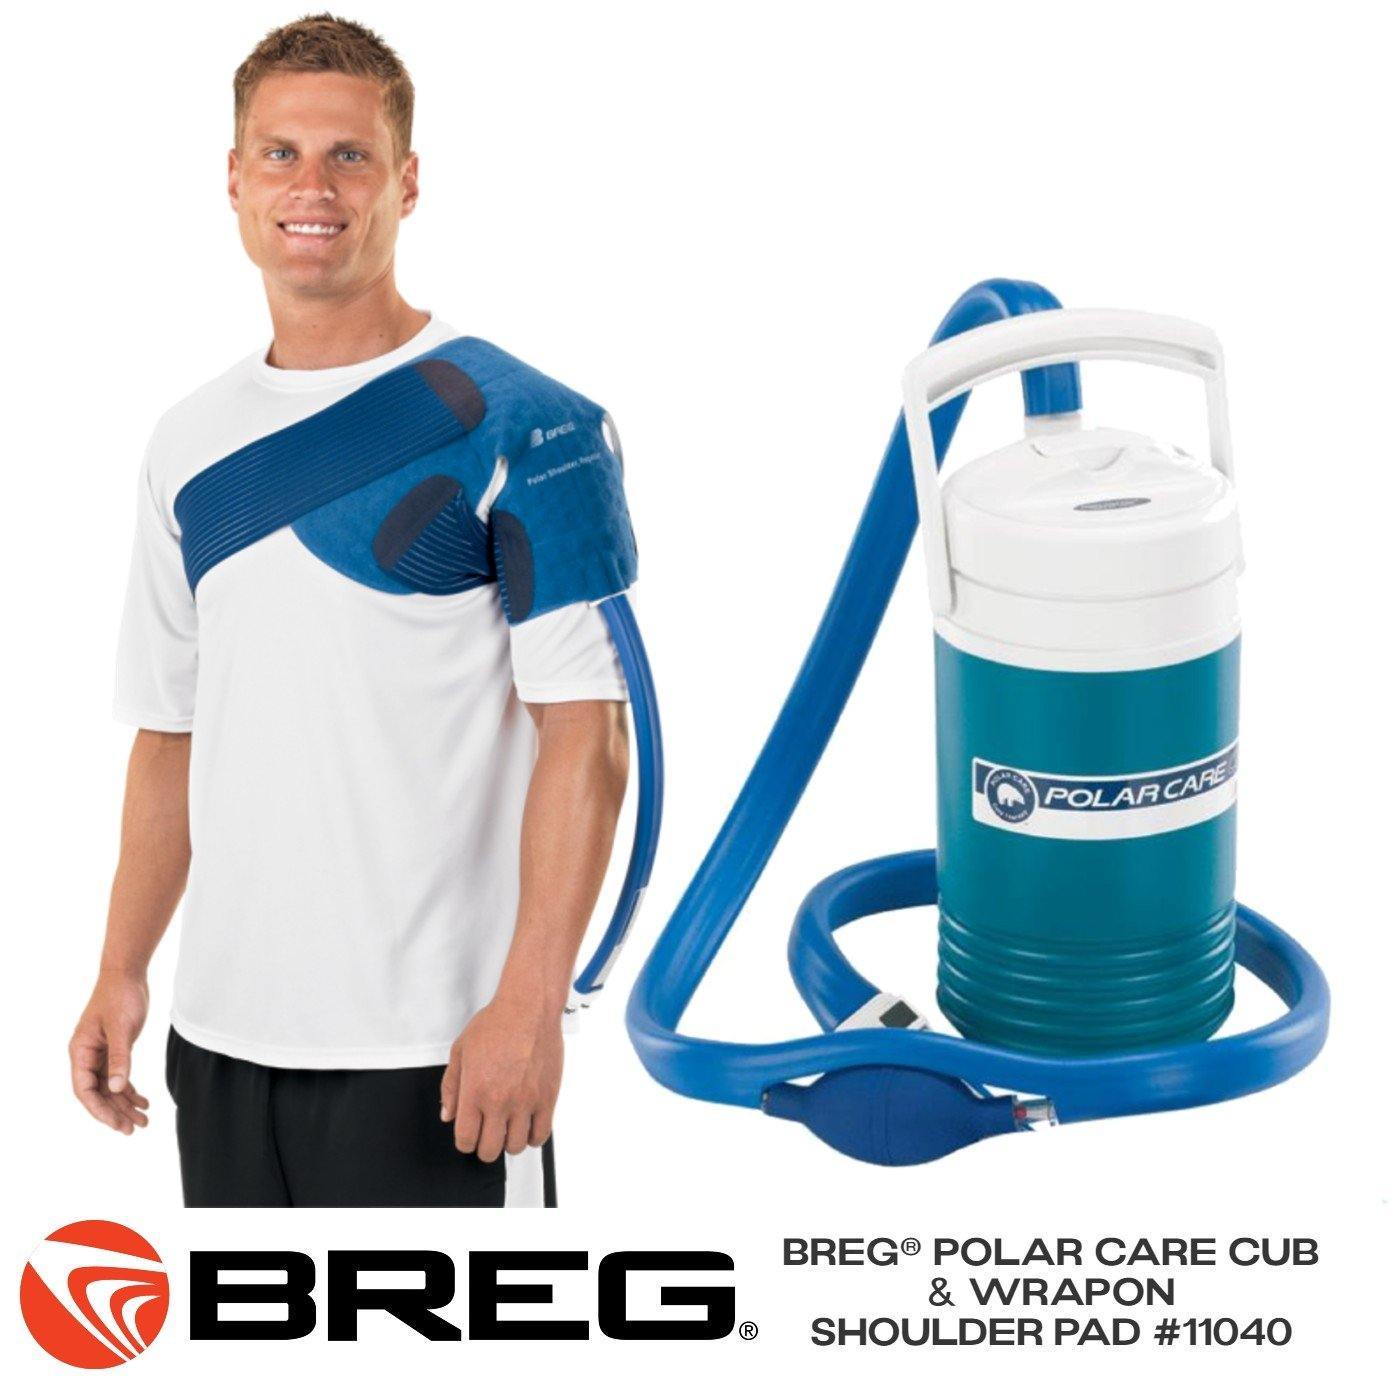 Breg® Polar Care Cub images by Supply Physical Therapy